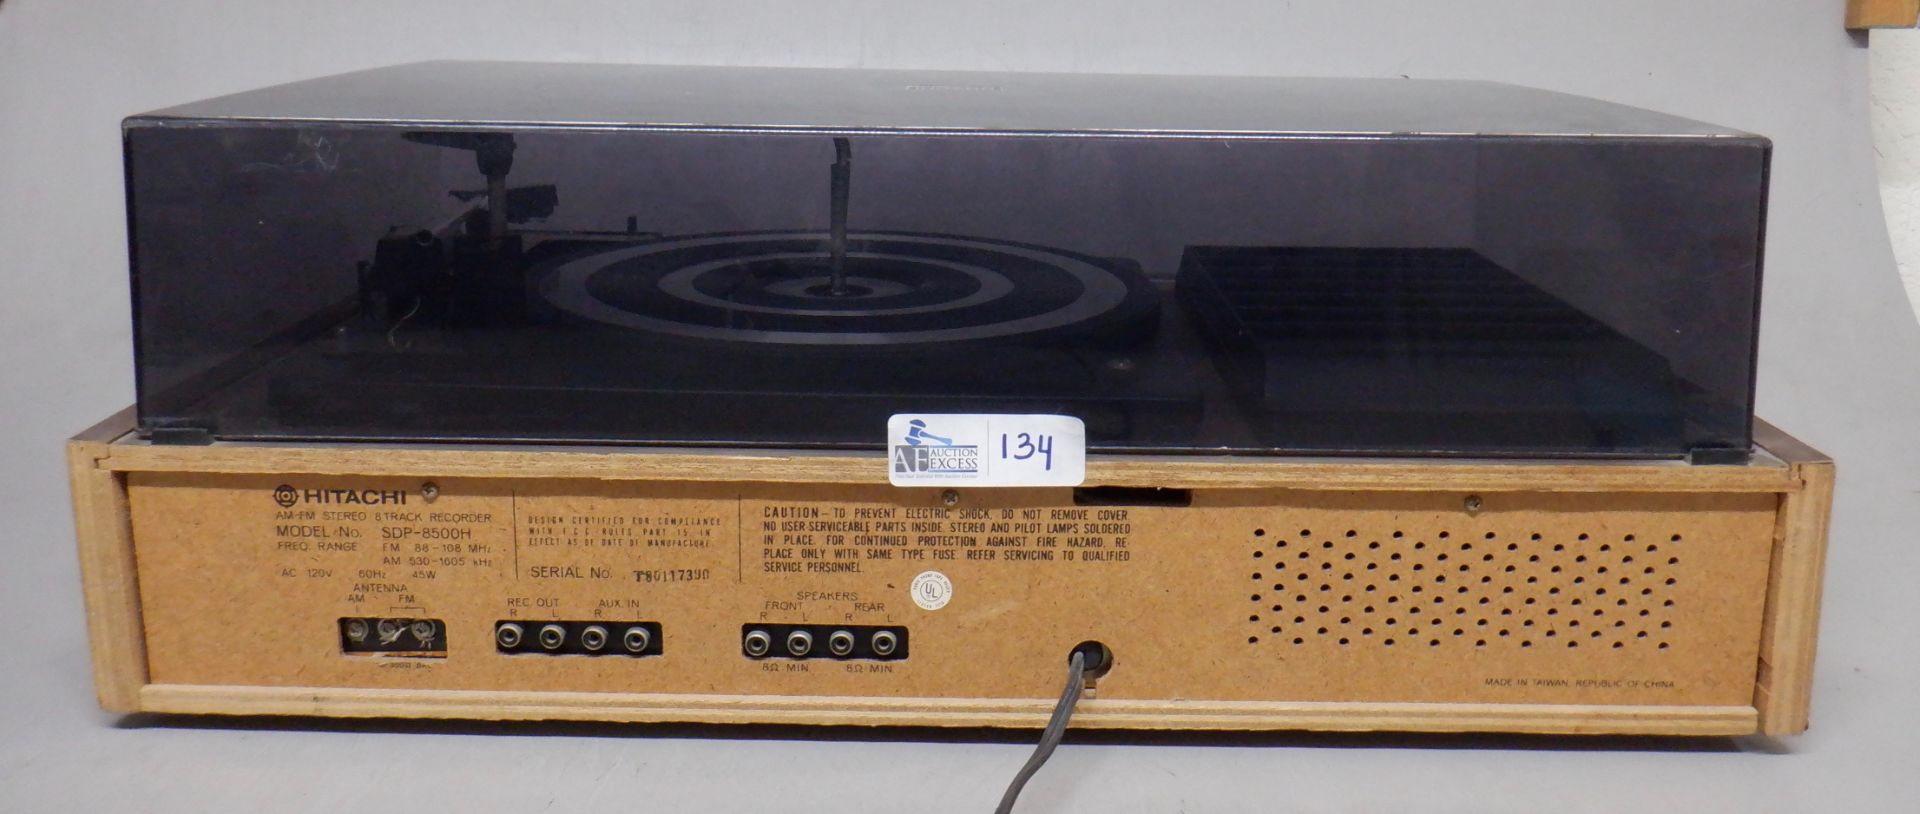 HITACHI SDP-8500H TURNTABLE SYSTEM - Image 4 of 4